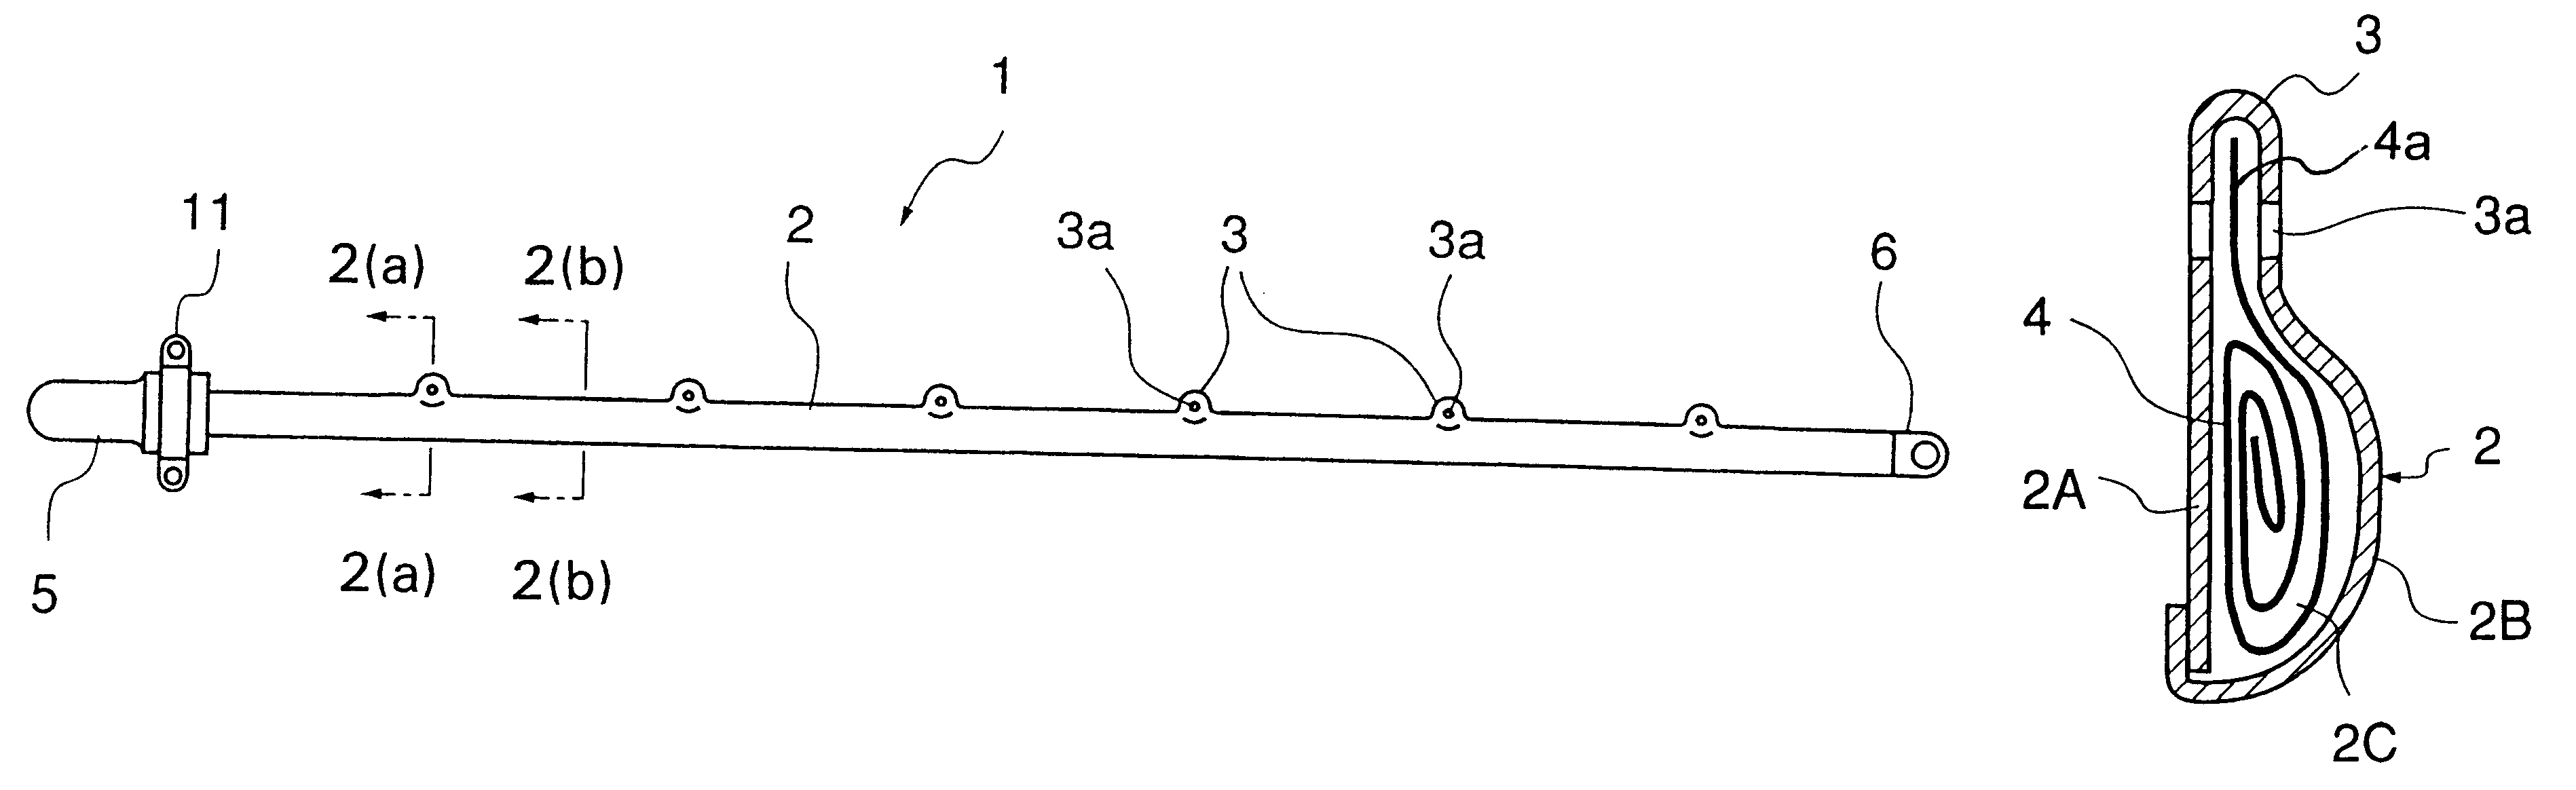 Side airbag device for restraining occupant's head